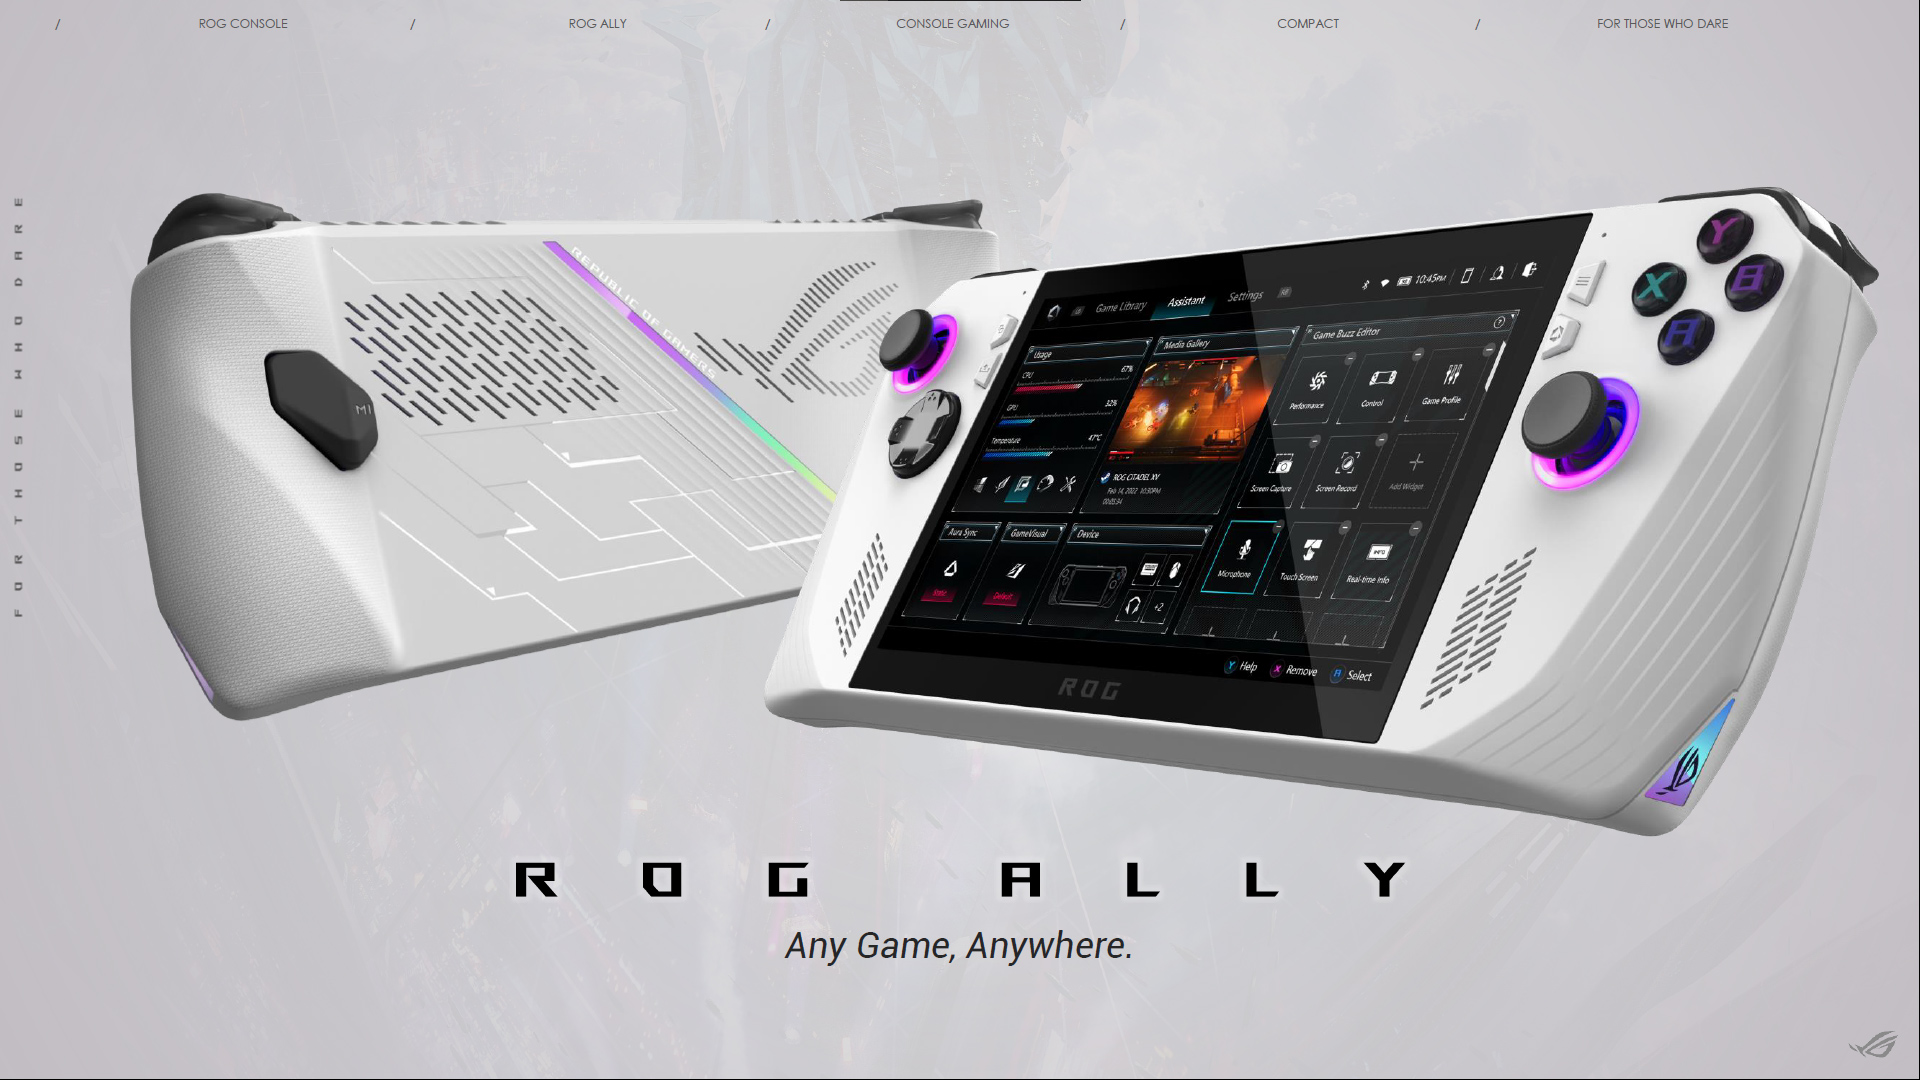 This amazing ASUS ROG Ally carrying case is finally available for purchase